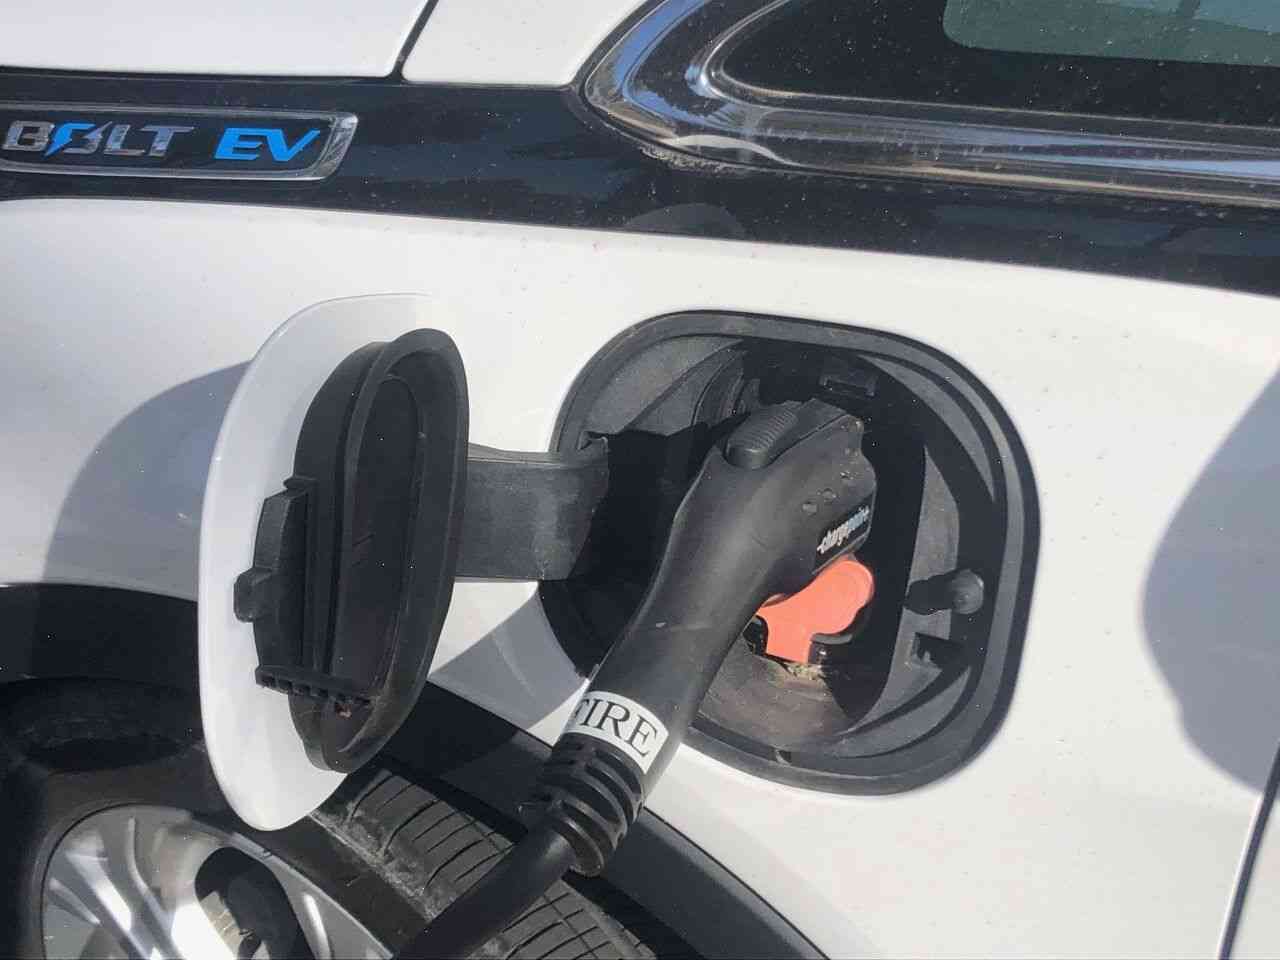 California should not charge electric vehicles during the day